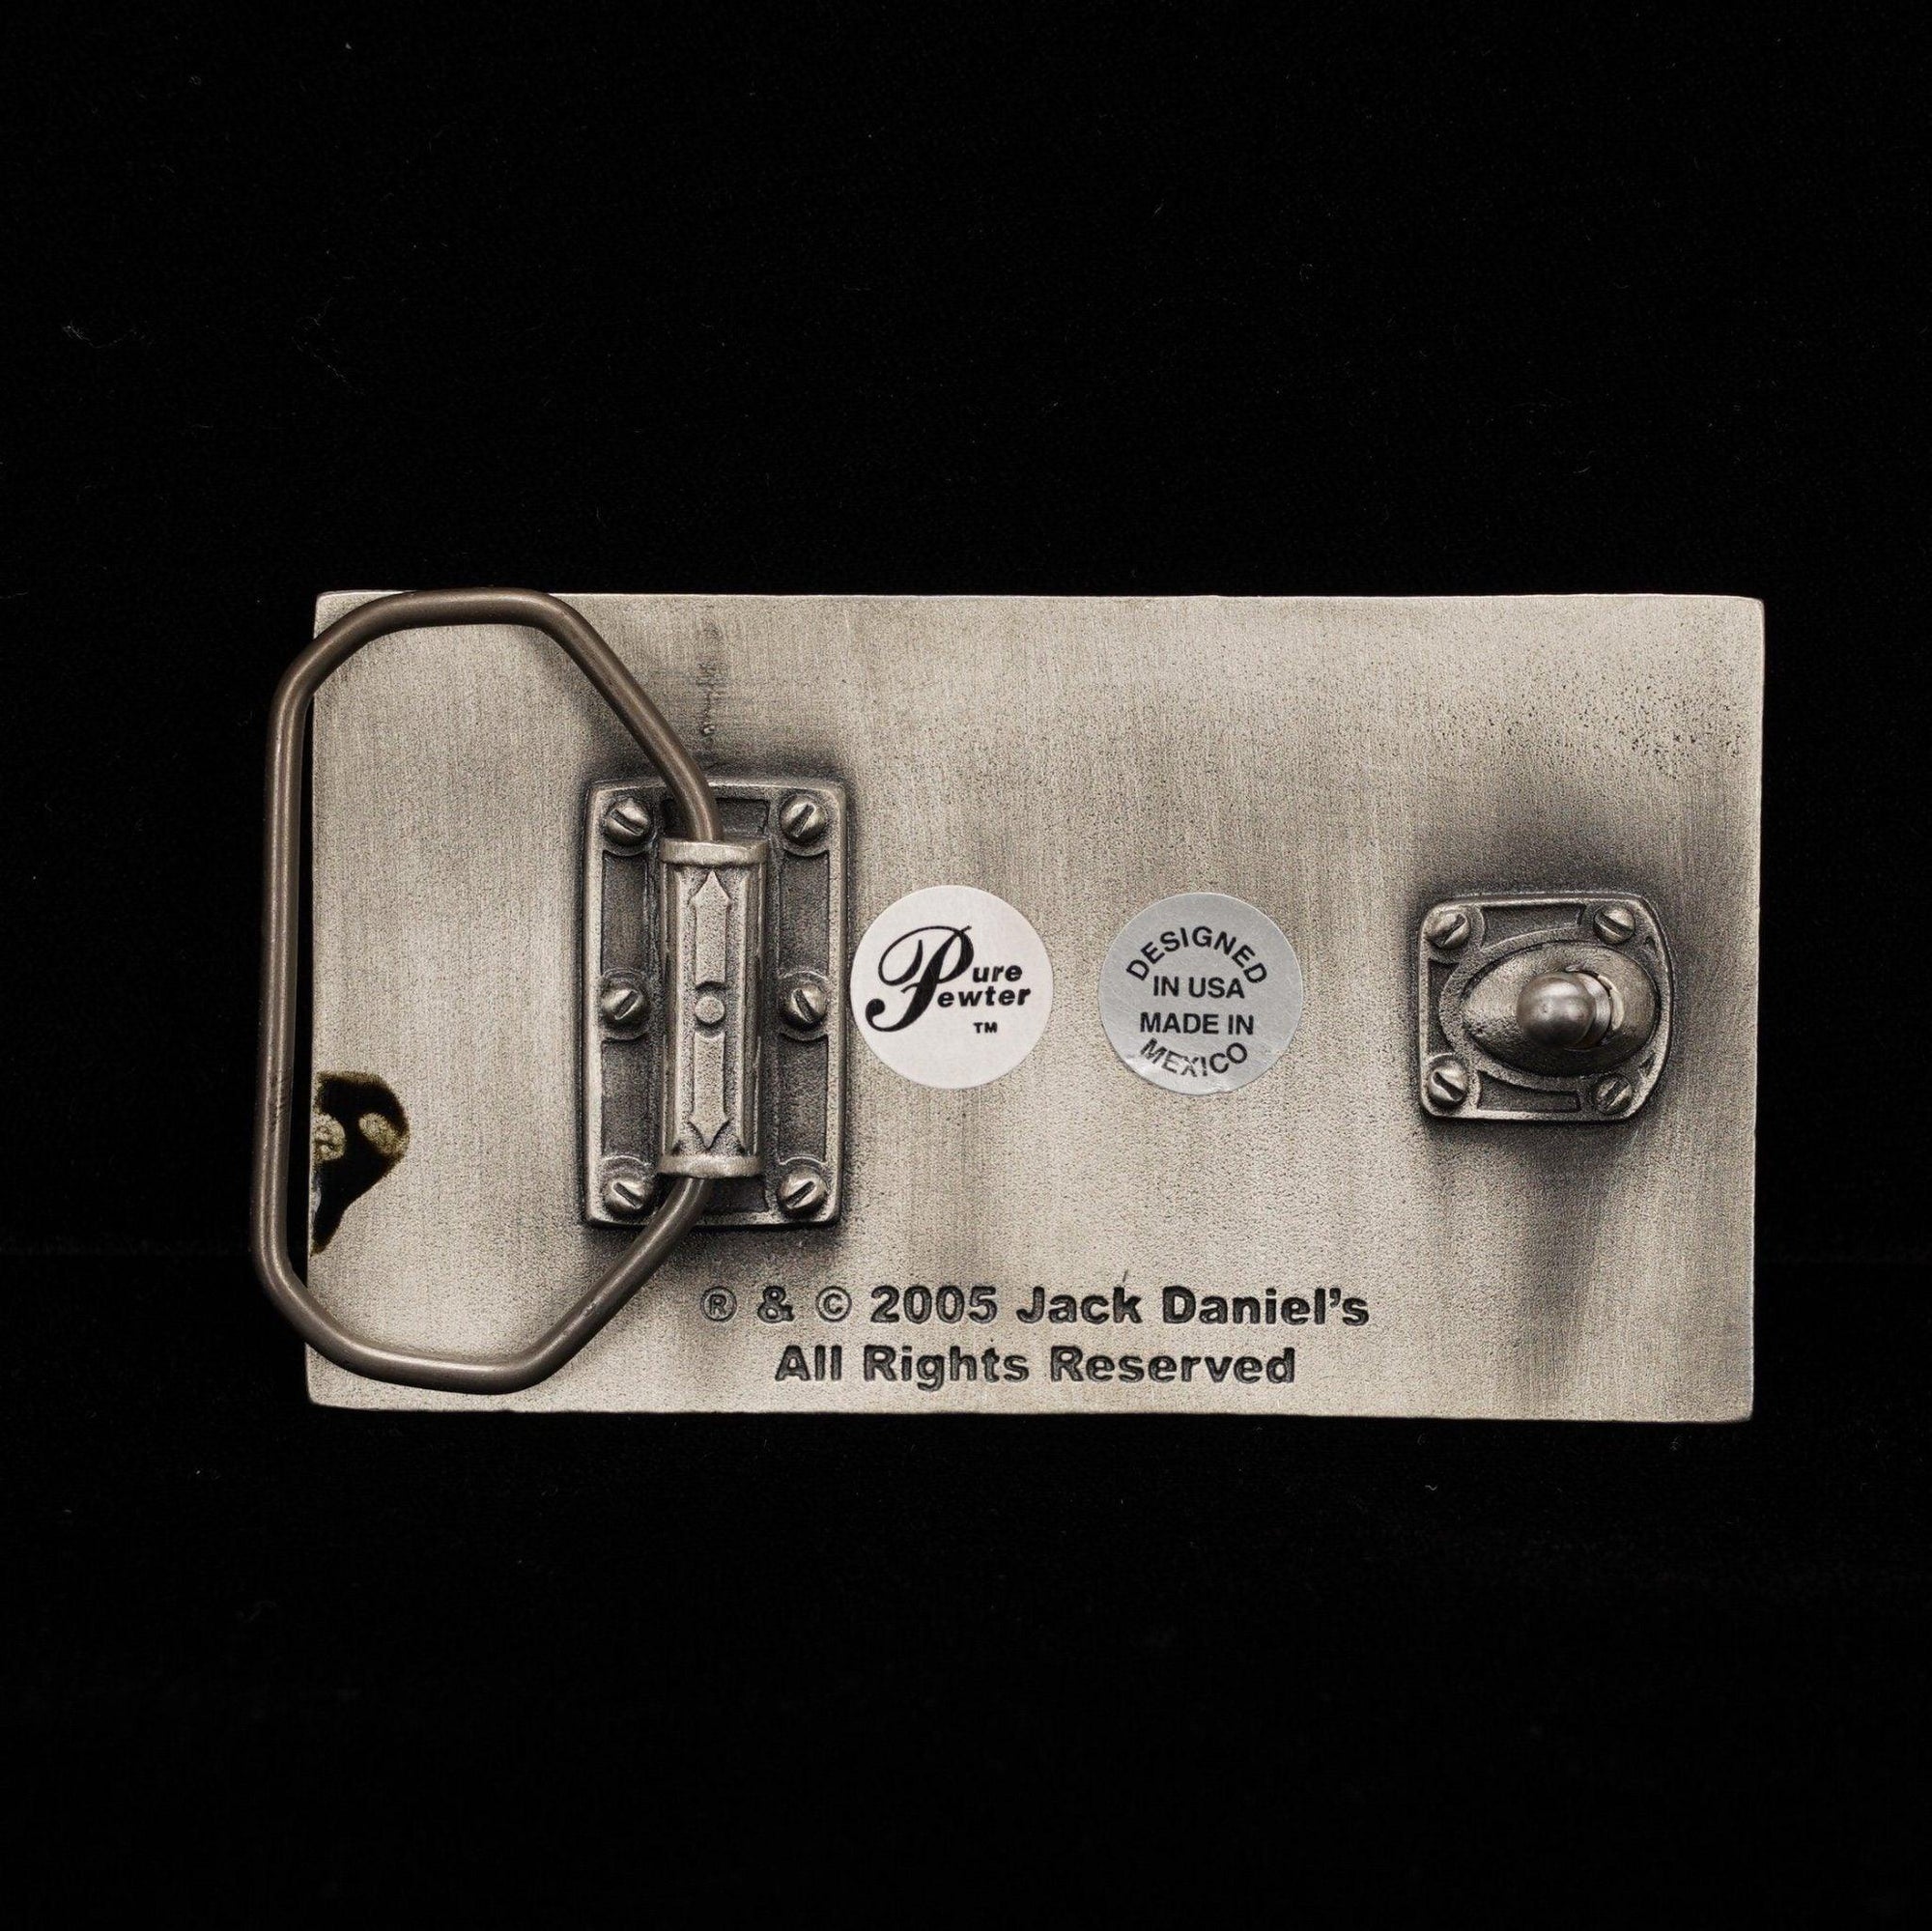 Jack Daniel’s Pure Pewter Old No 7 Buckle - The Whiskey Cave